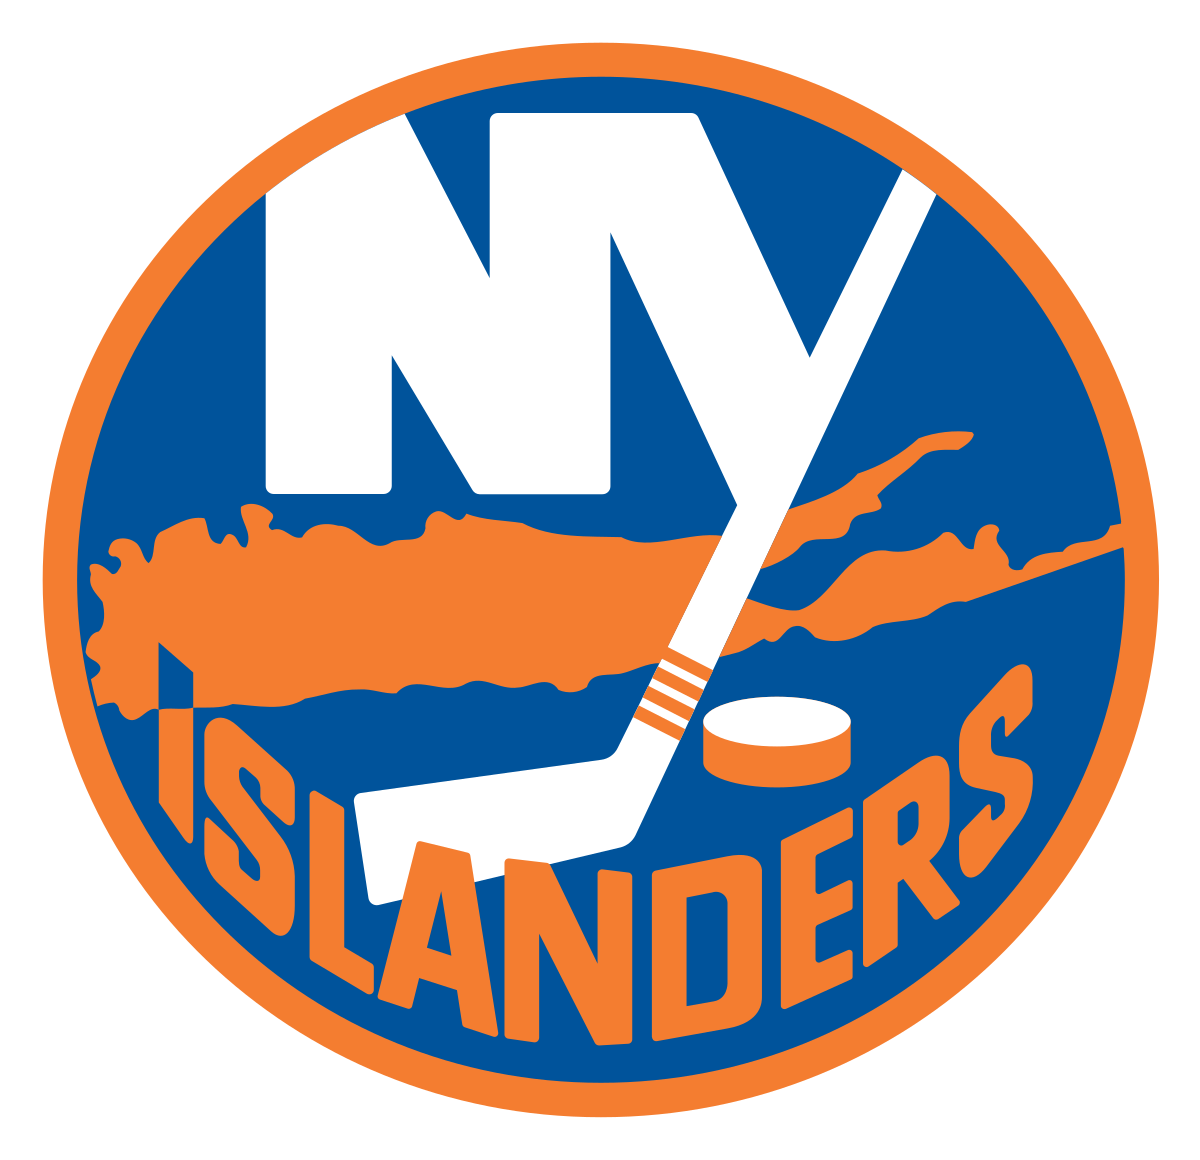 Construction stops at Islanders' new arena